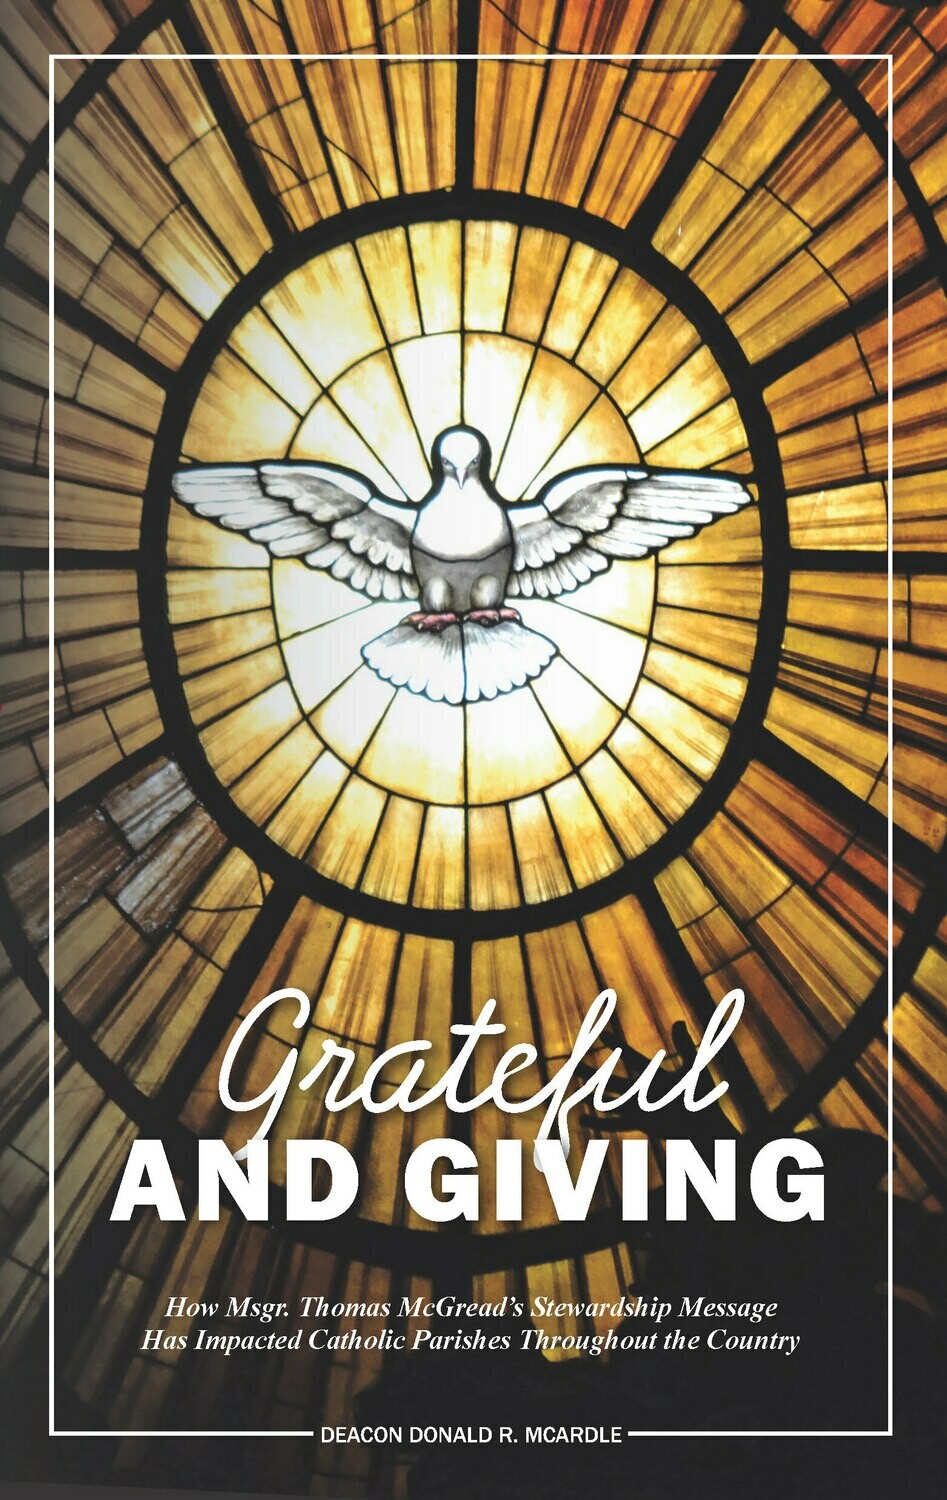 Grateful and Giving: How Msgr. Thomas McGread’s Stewardship Message
Has Impacted Catholic Parishes Throughout the Country